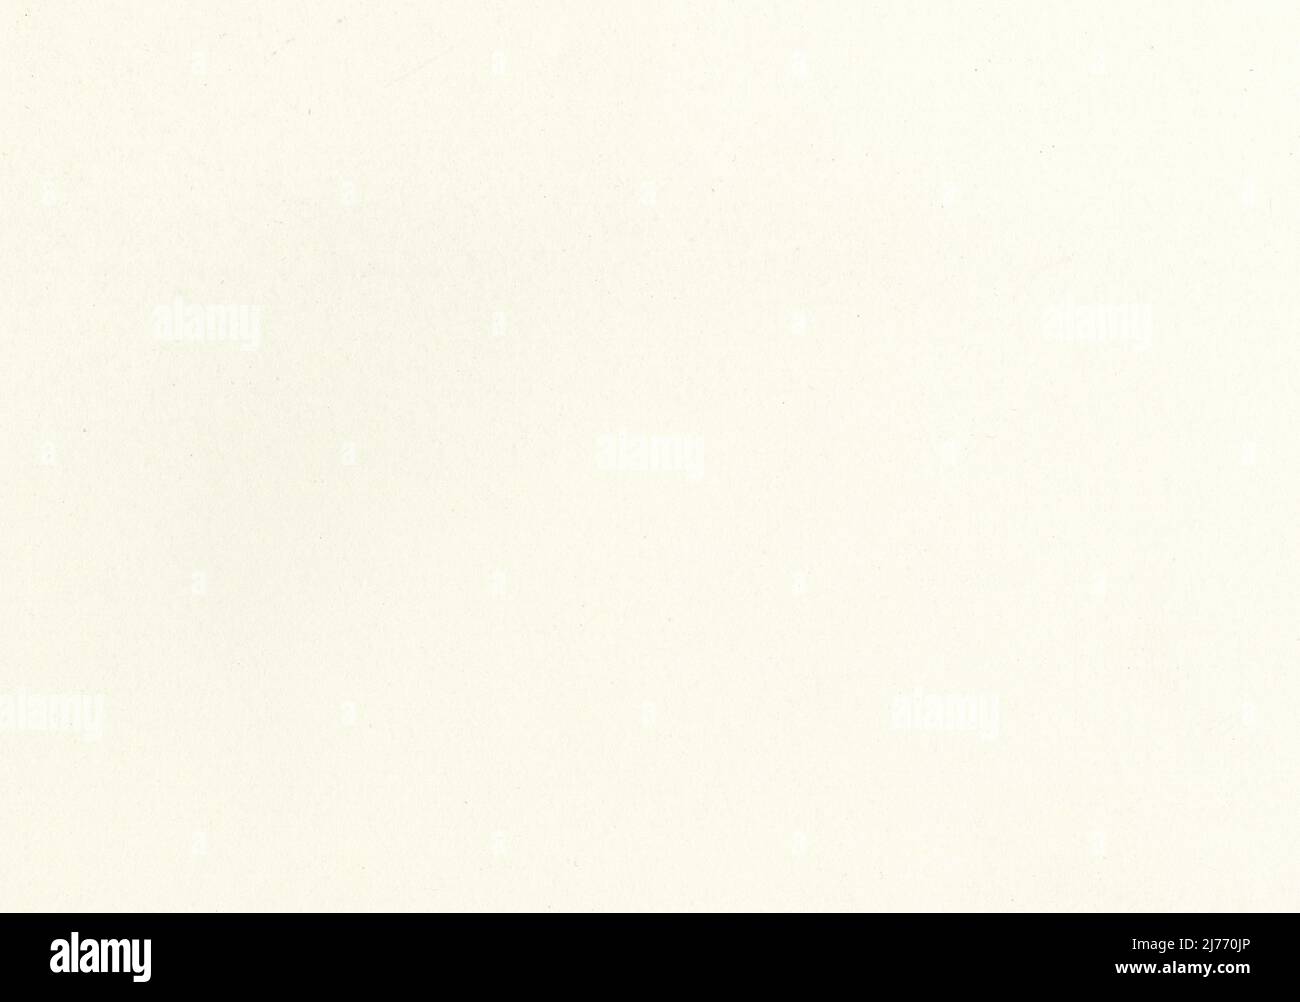 High resolution old light beige paper texture background scan with fine grain fiber and dust particles smooth uncoated aged paper for wallpapers and m Stock Photo